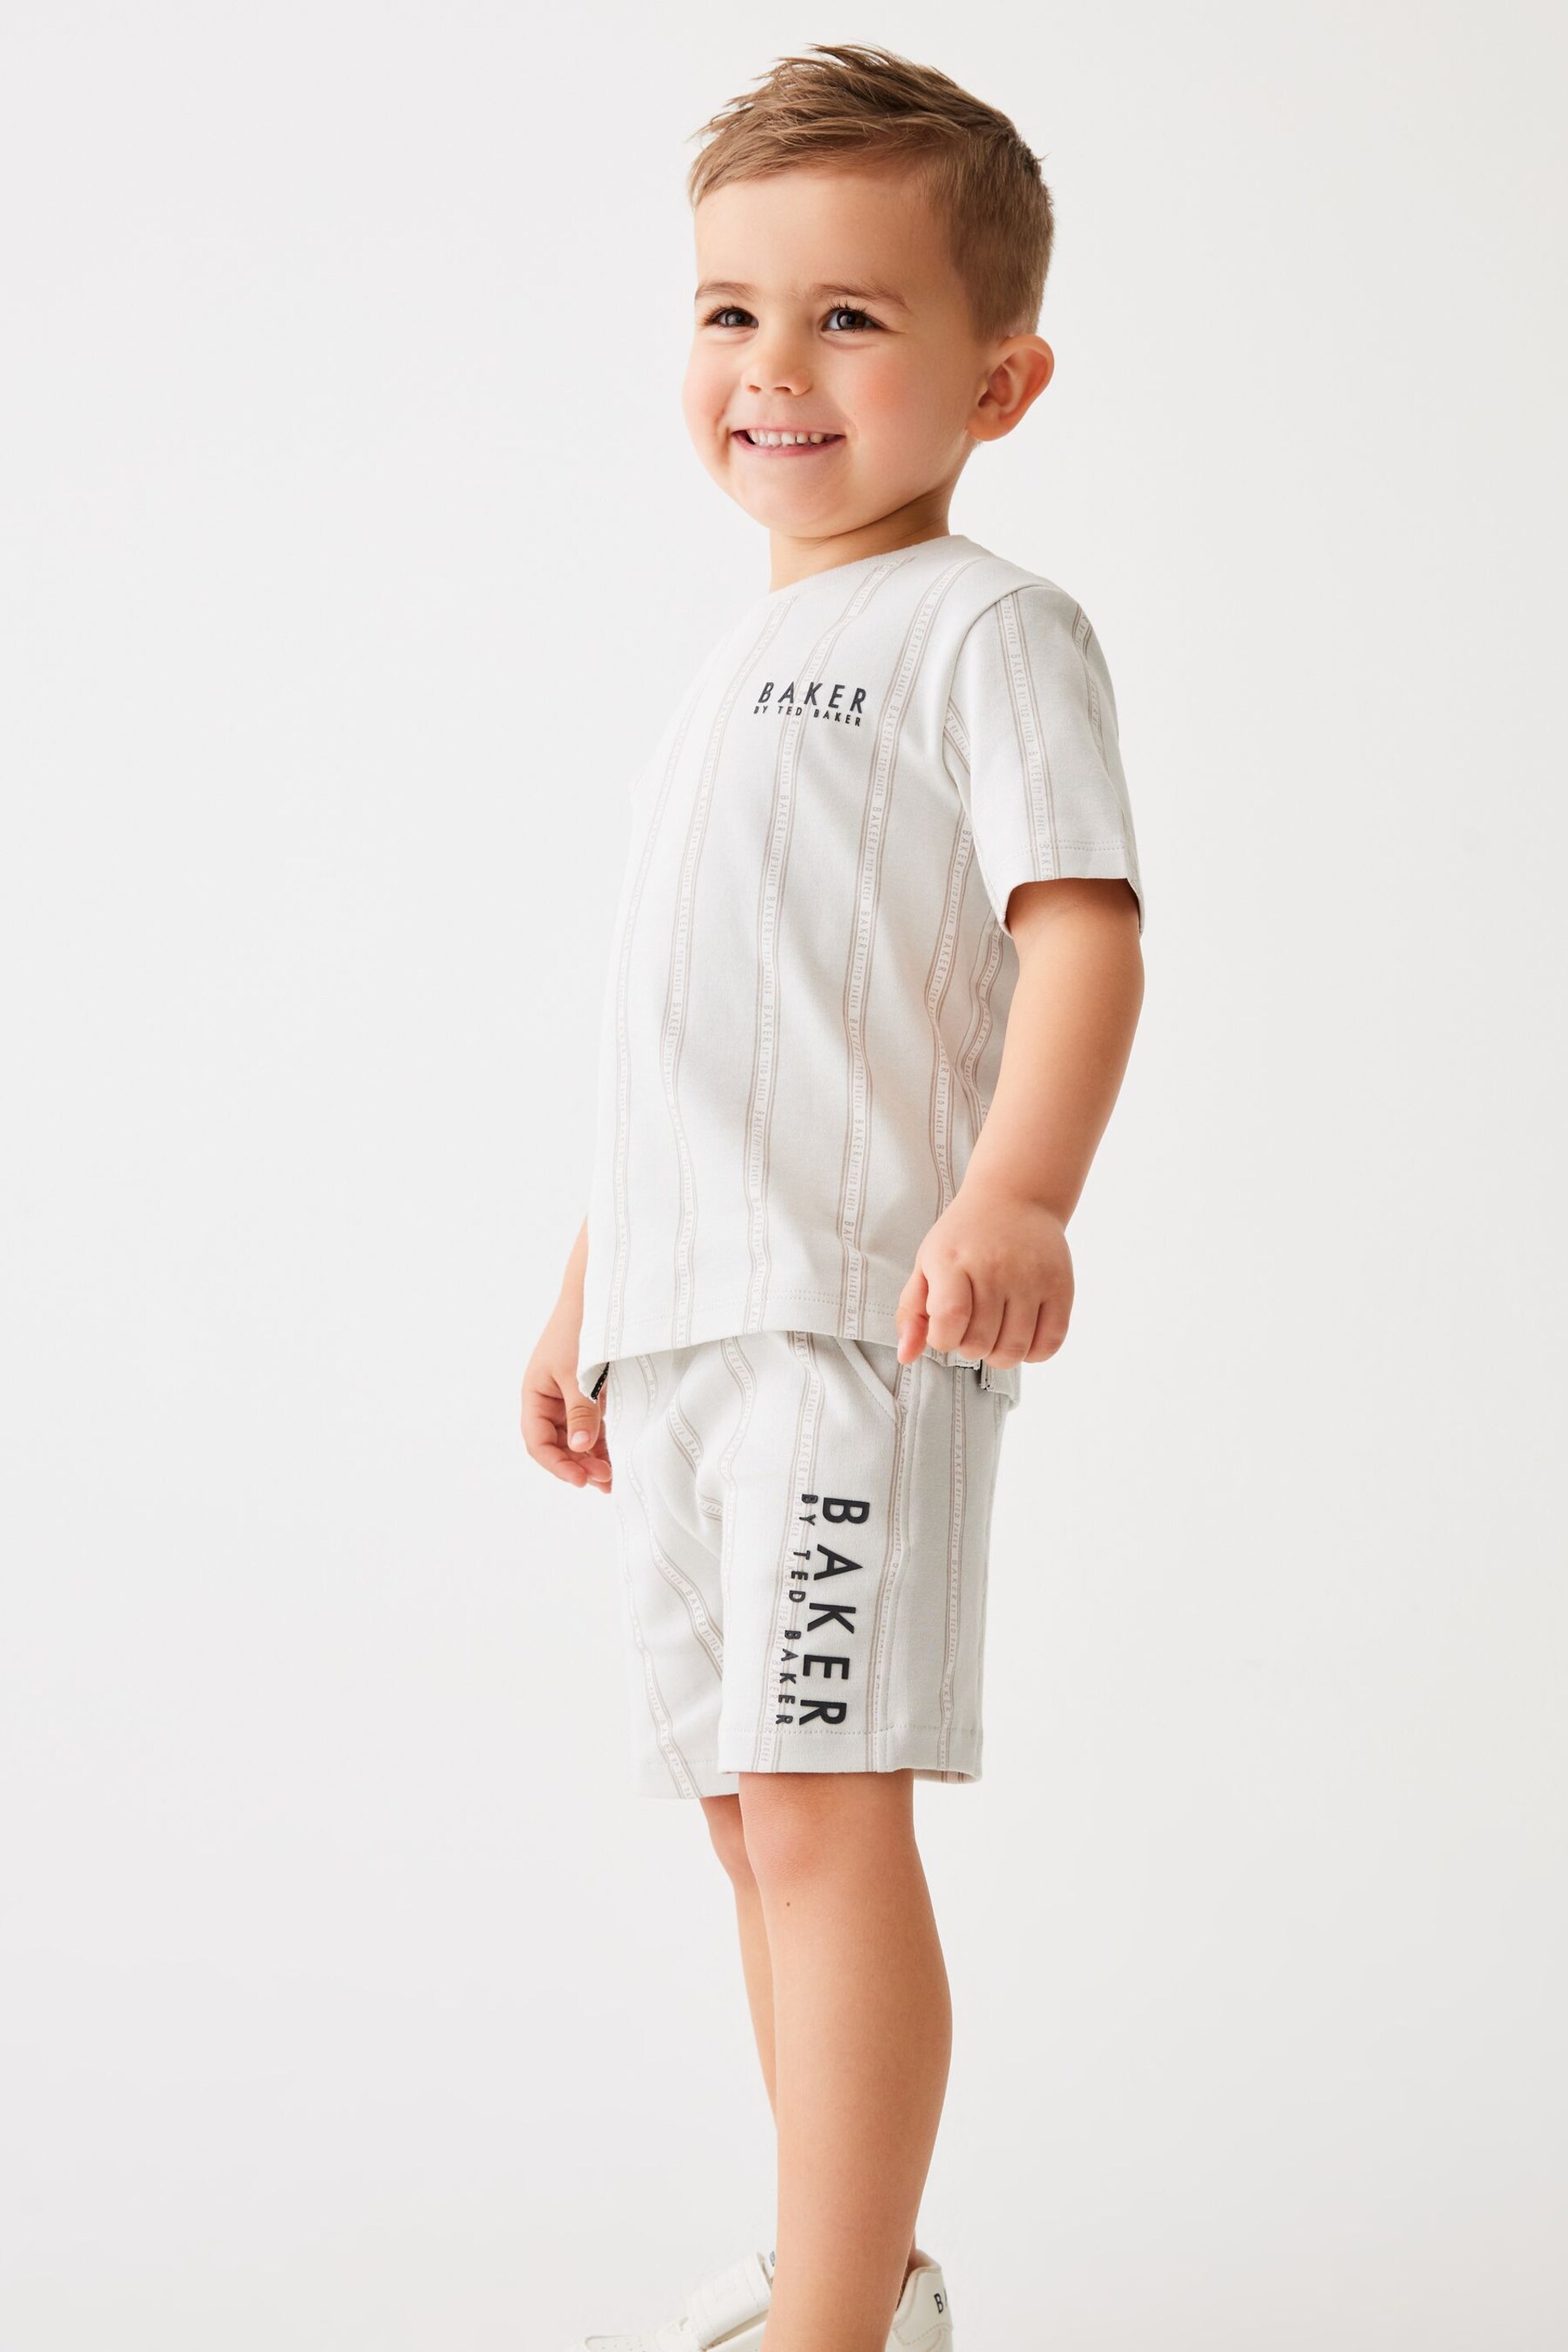 Baker by Ted Baker Striped T-Shirt and Shorts Set - Image 2 of 9